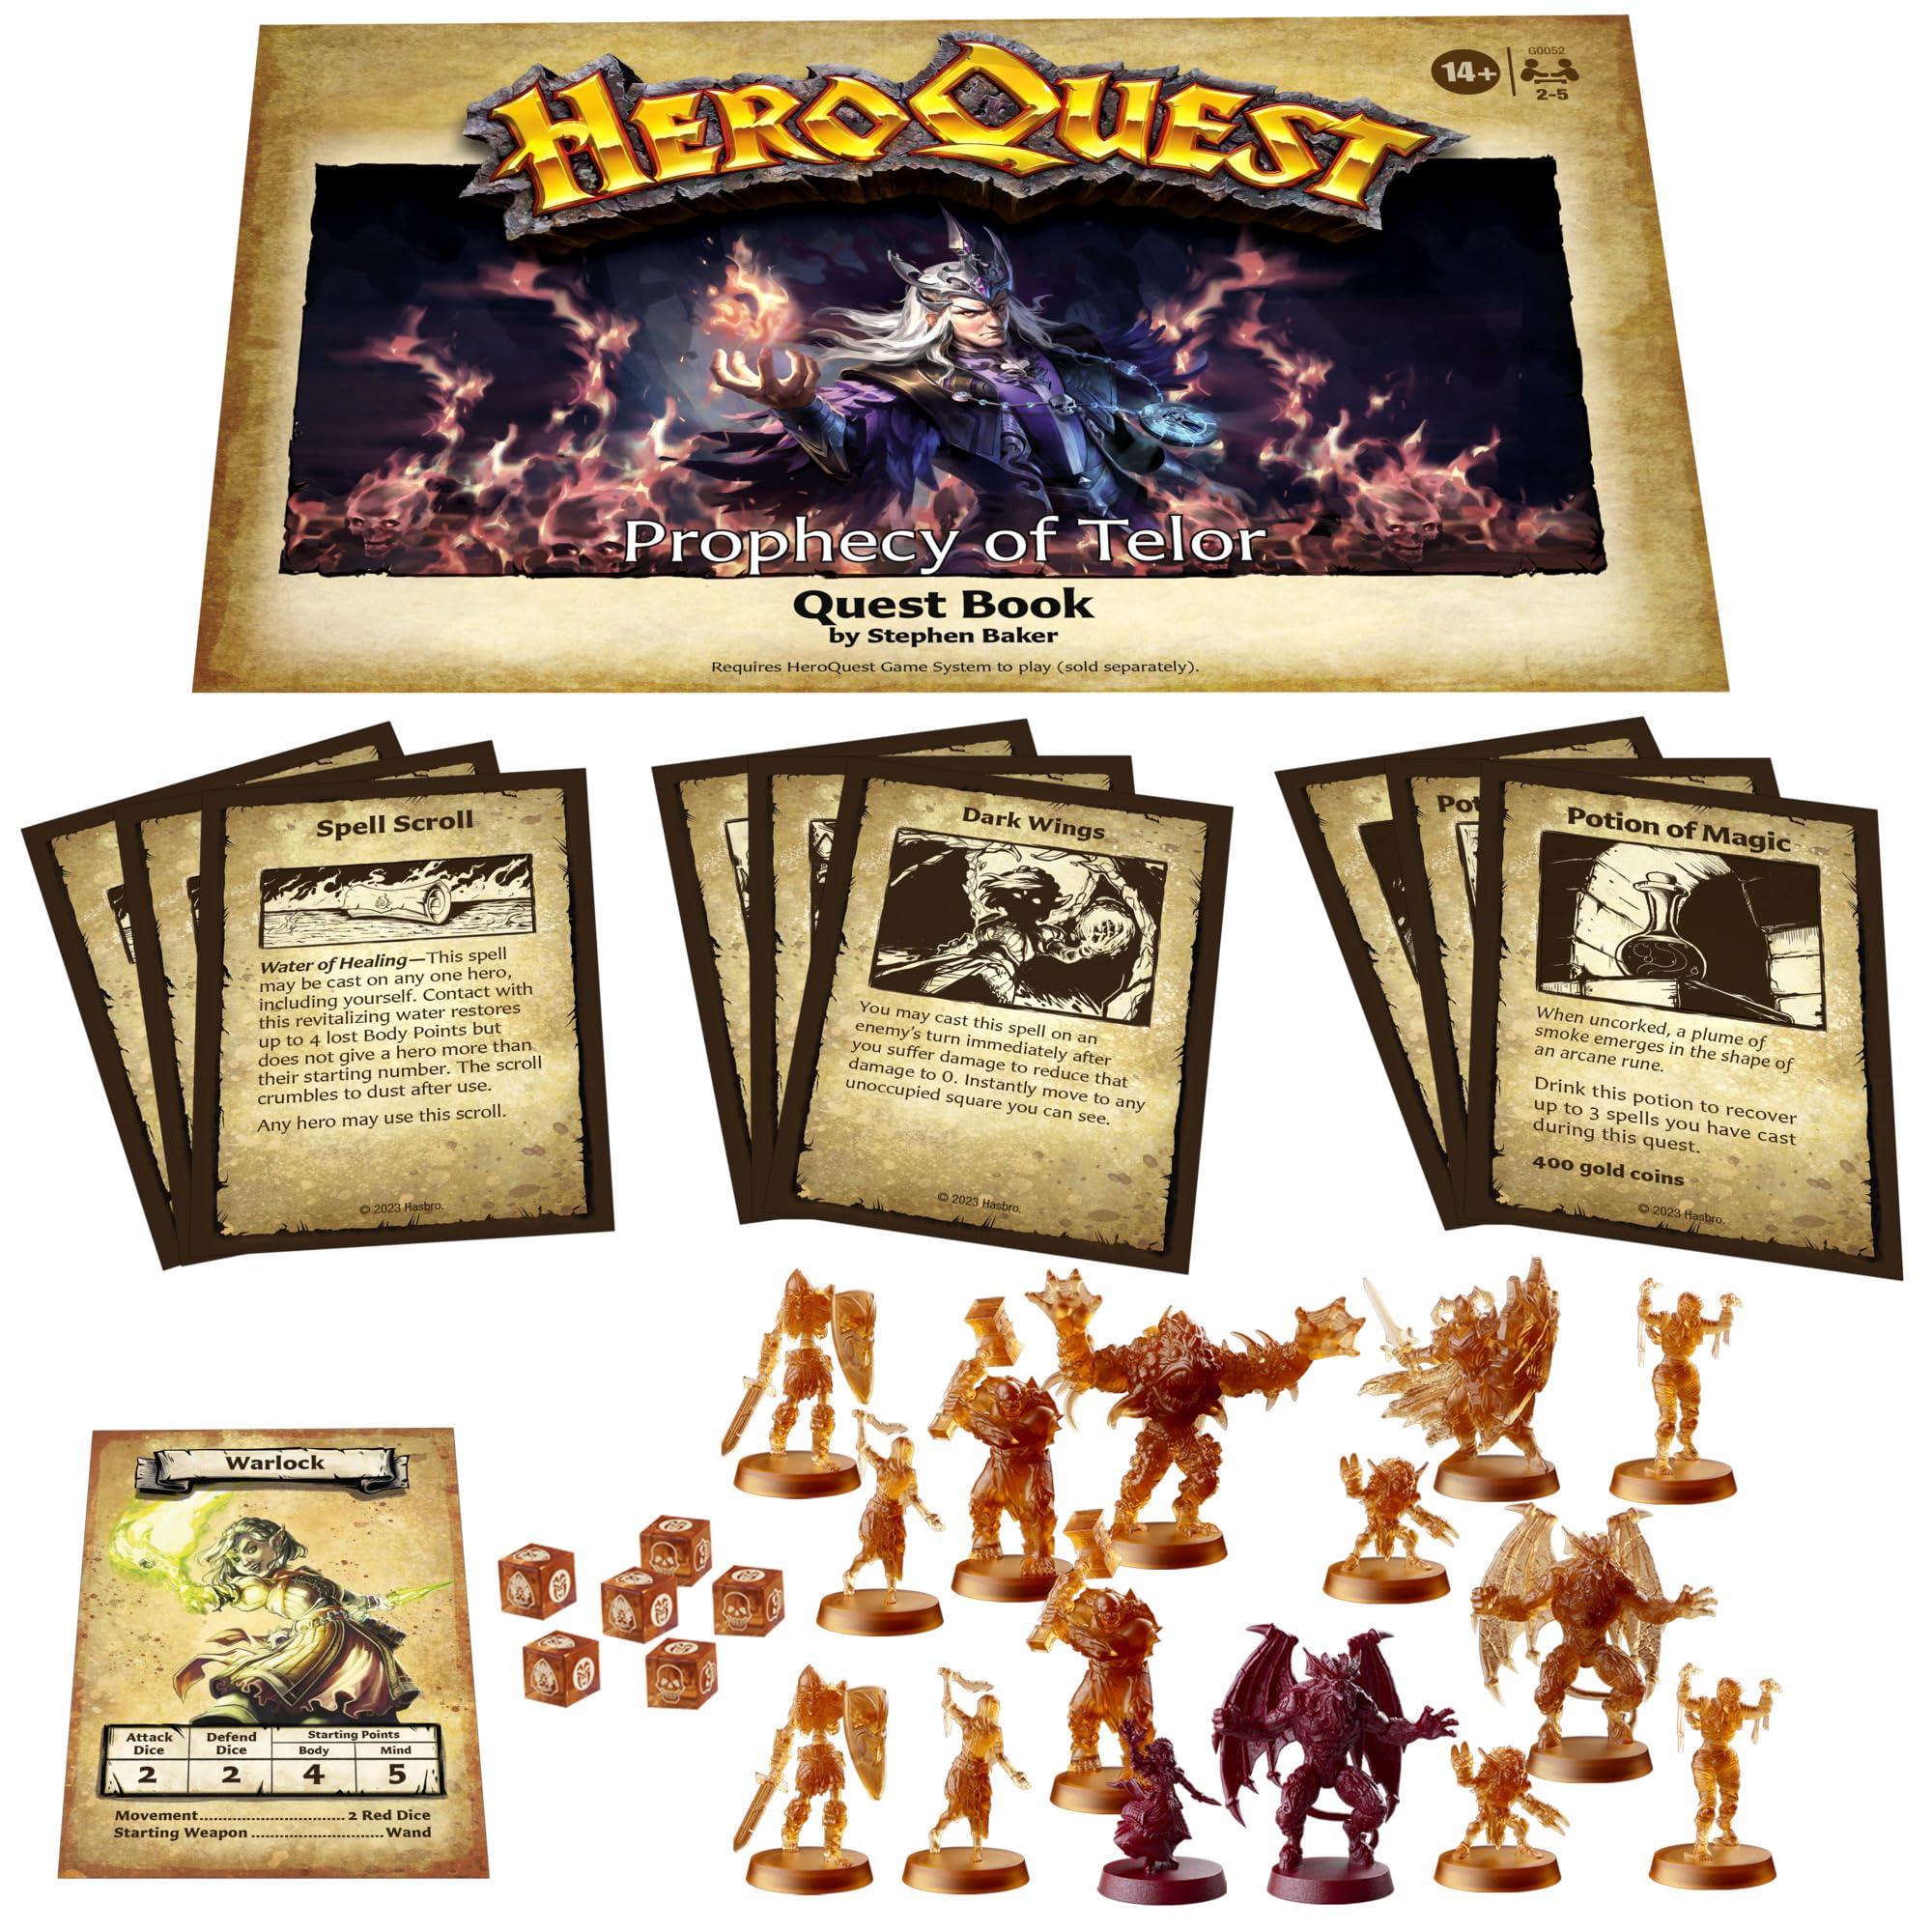 Hasbro Gaming HeroQuest Prophecy of Telor Quest Pack | Requires HeroQuest Game System to Play | Dungeon Crawler Games | Ages 14+ | 2-5 Players | Strategy Games